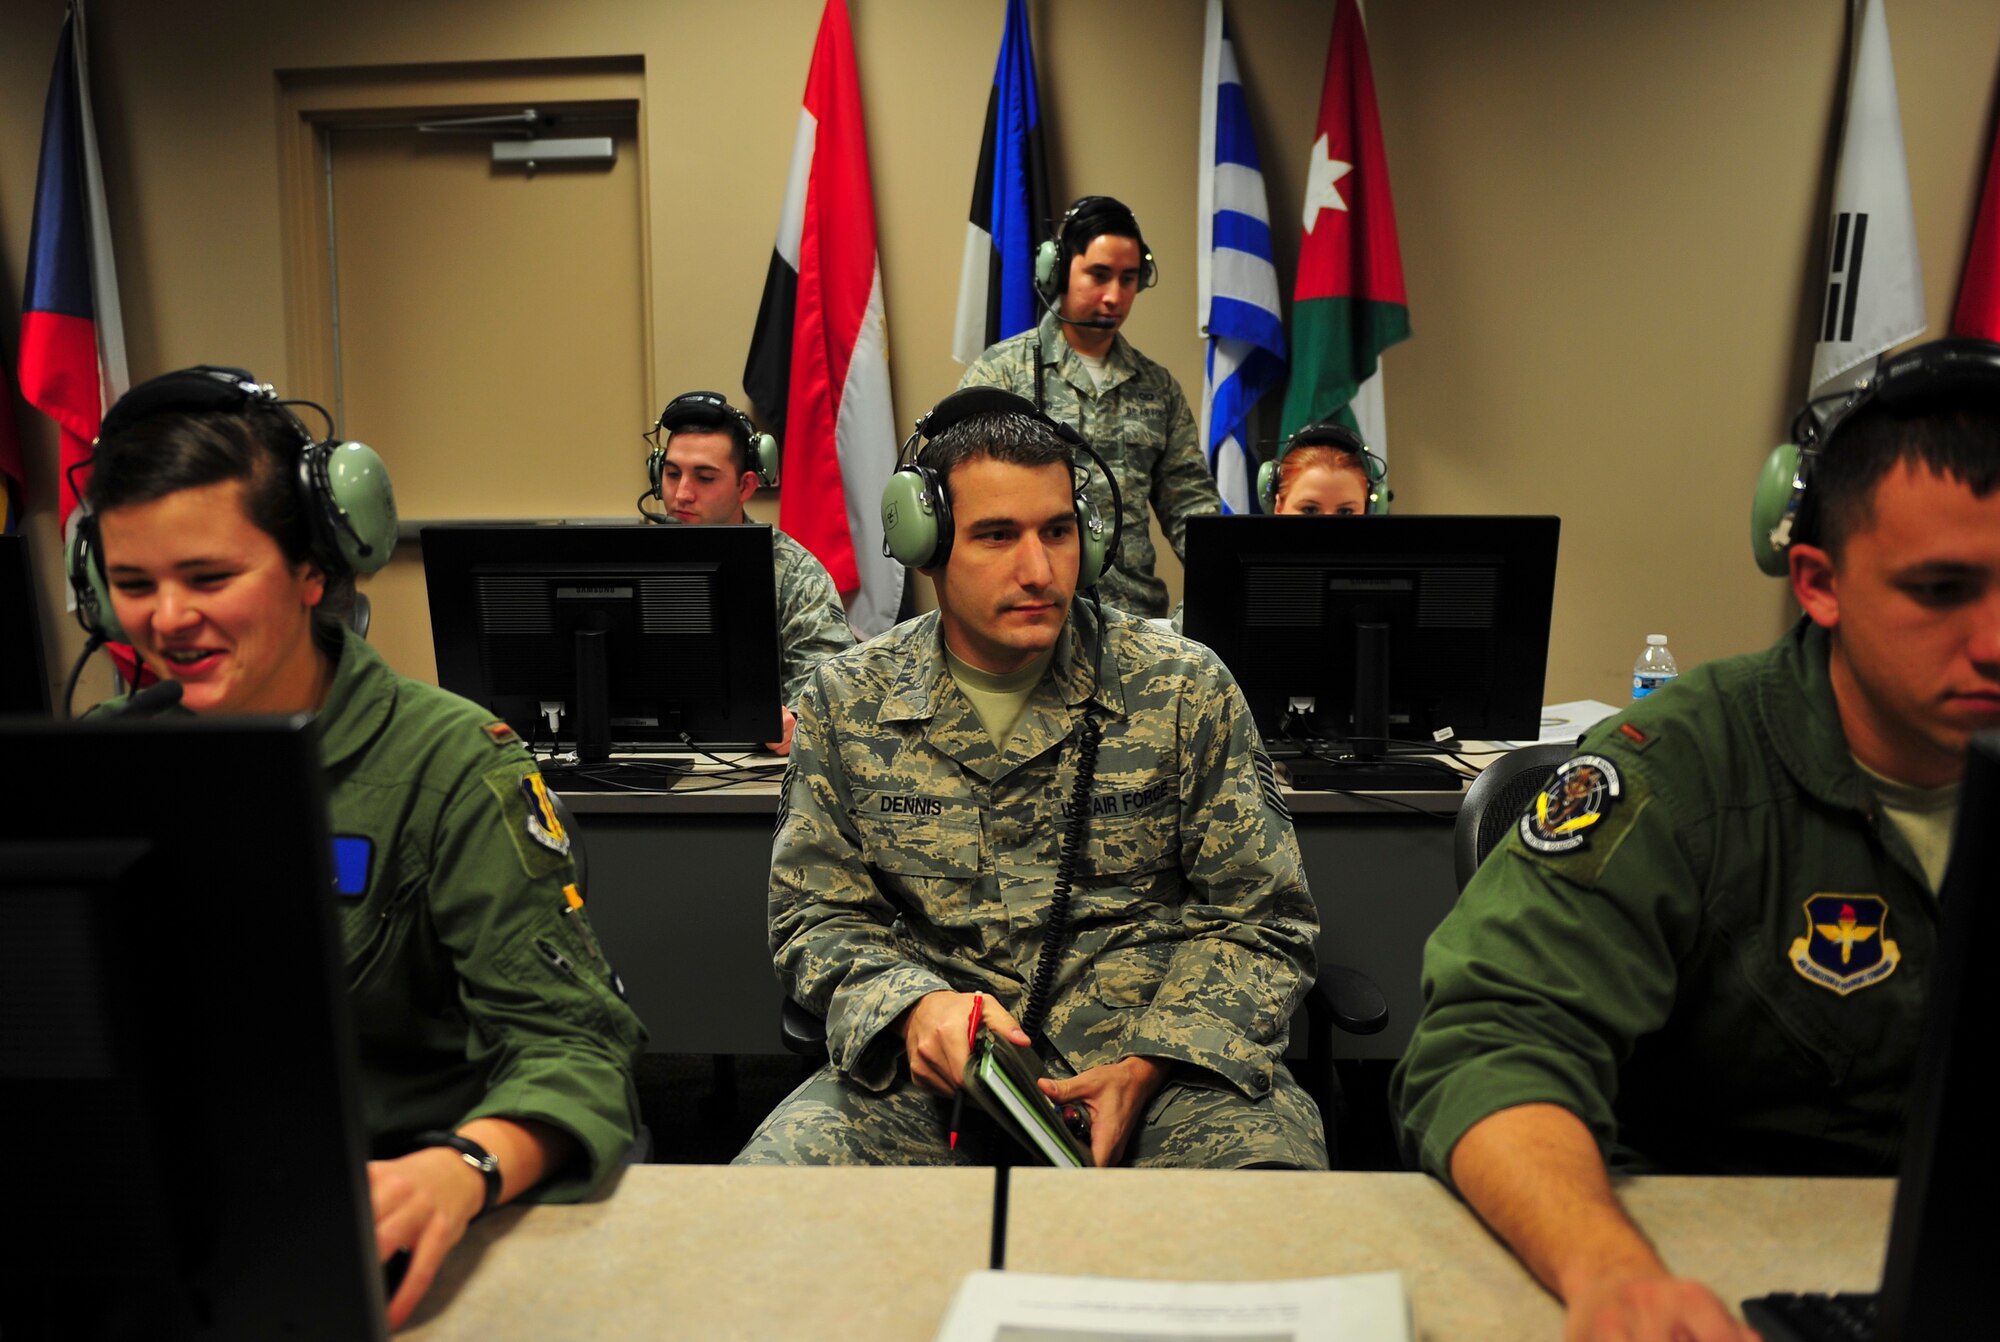 Technical Sgt. Jonathon Dennis, 337th Air Control Squadron instructor weapons director, instructs two students of the Air Battle Manager undergraduate course at the 337th ACS, Jan. 15. Dennis is responsible for instructing ABMs on a variety of missions to facilitate the Air Education and Training Command syllabus; some of these missions include simulated air to ground, large force employment simulations as well as live mission scenarios.  Ultimately, teaching the students to prioritize weapons, sensors and fuel, to meet the commander’s intent and acceptable level of risk. (U.S. Air Force Photo by Senior Airman Dustin Mullen/Released)